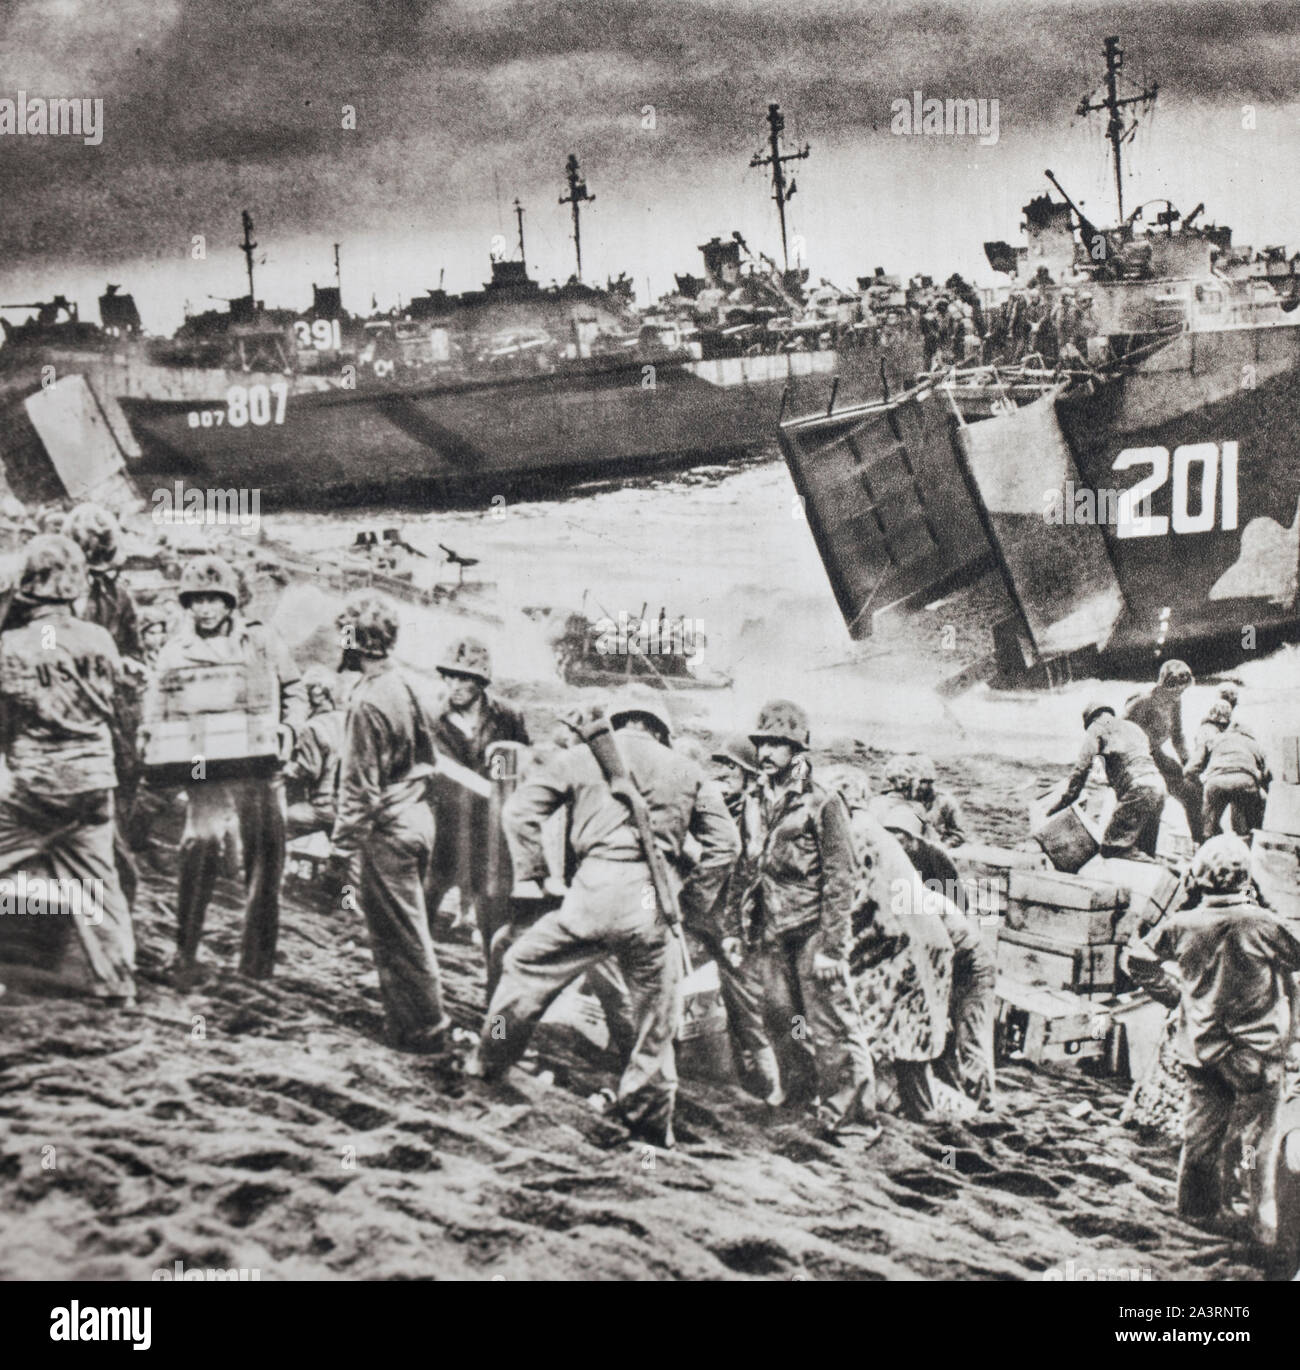 The American equipment debarque in Iwo Jima island. An unbroken flow of troops and equipment is poured onto the beaches of this hard-to-reach vocanic Stock Photo